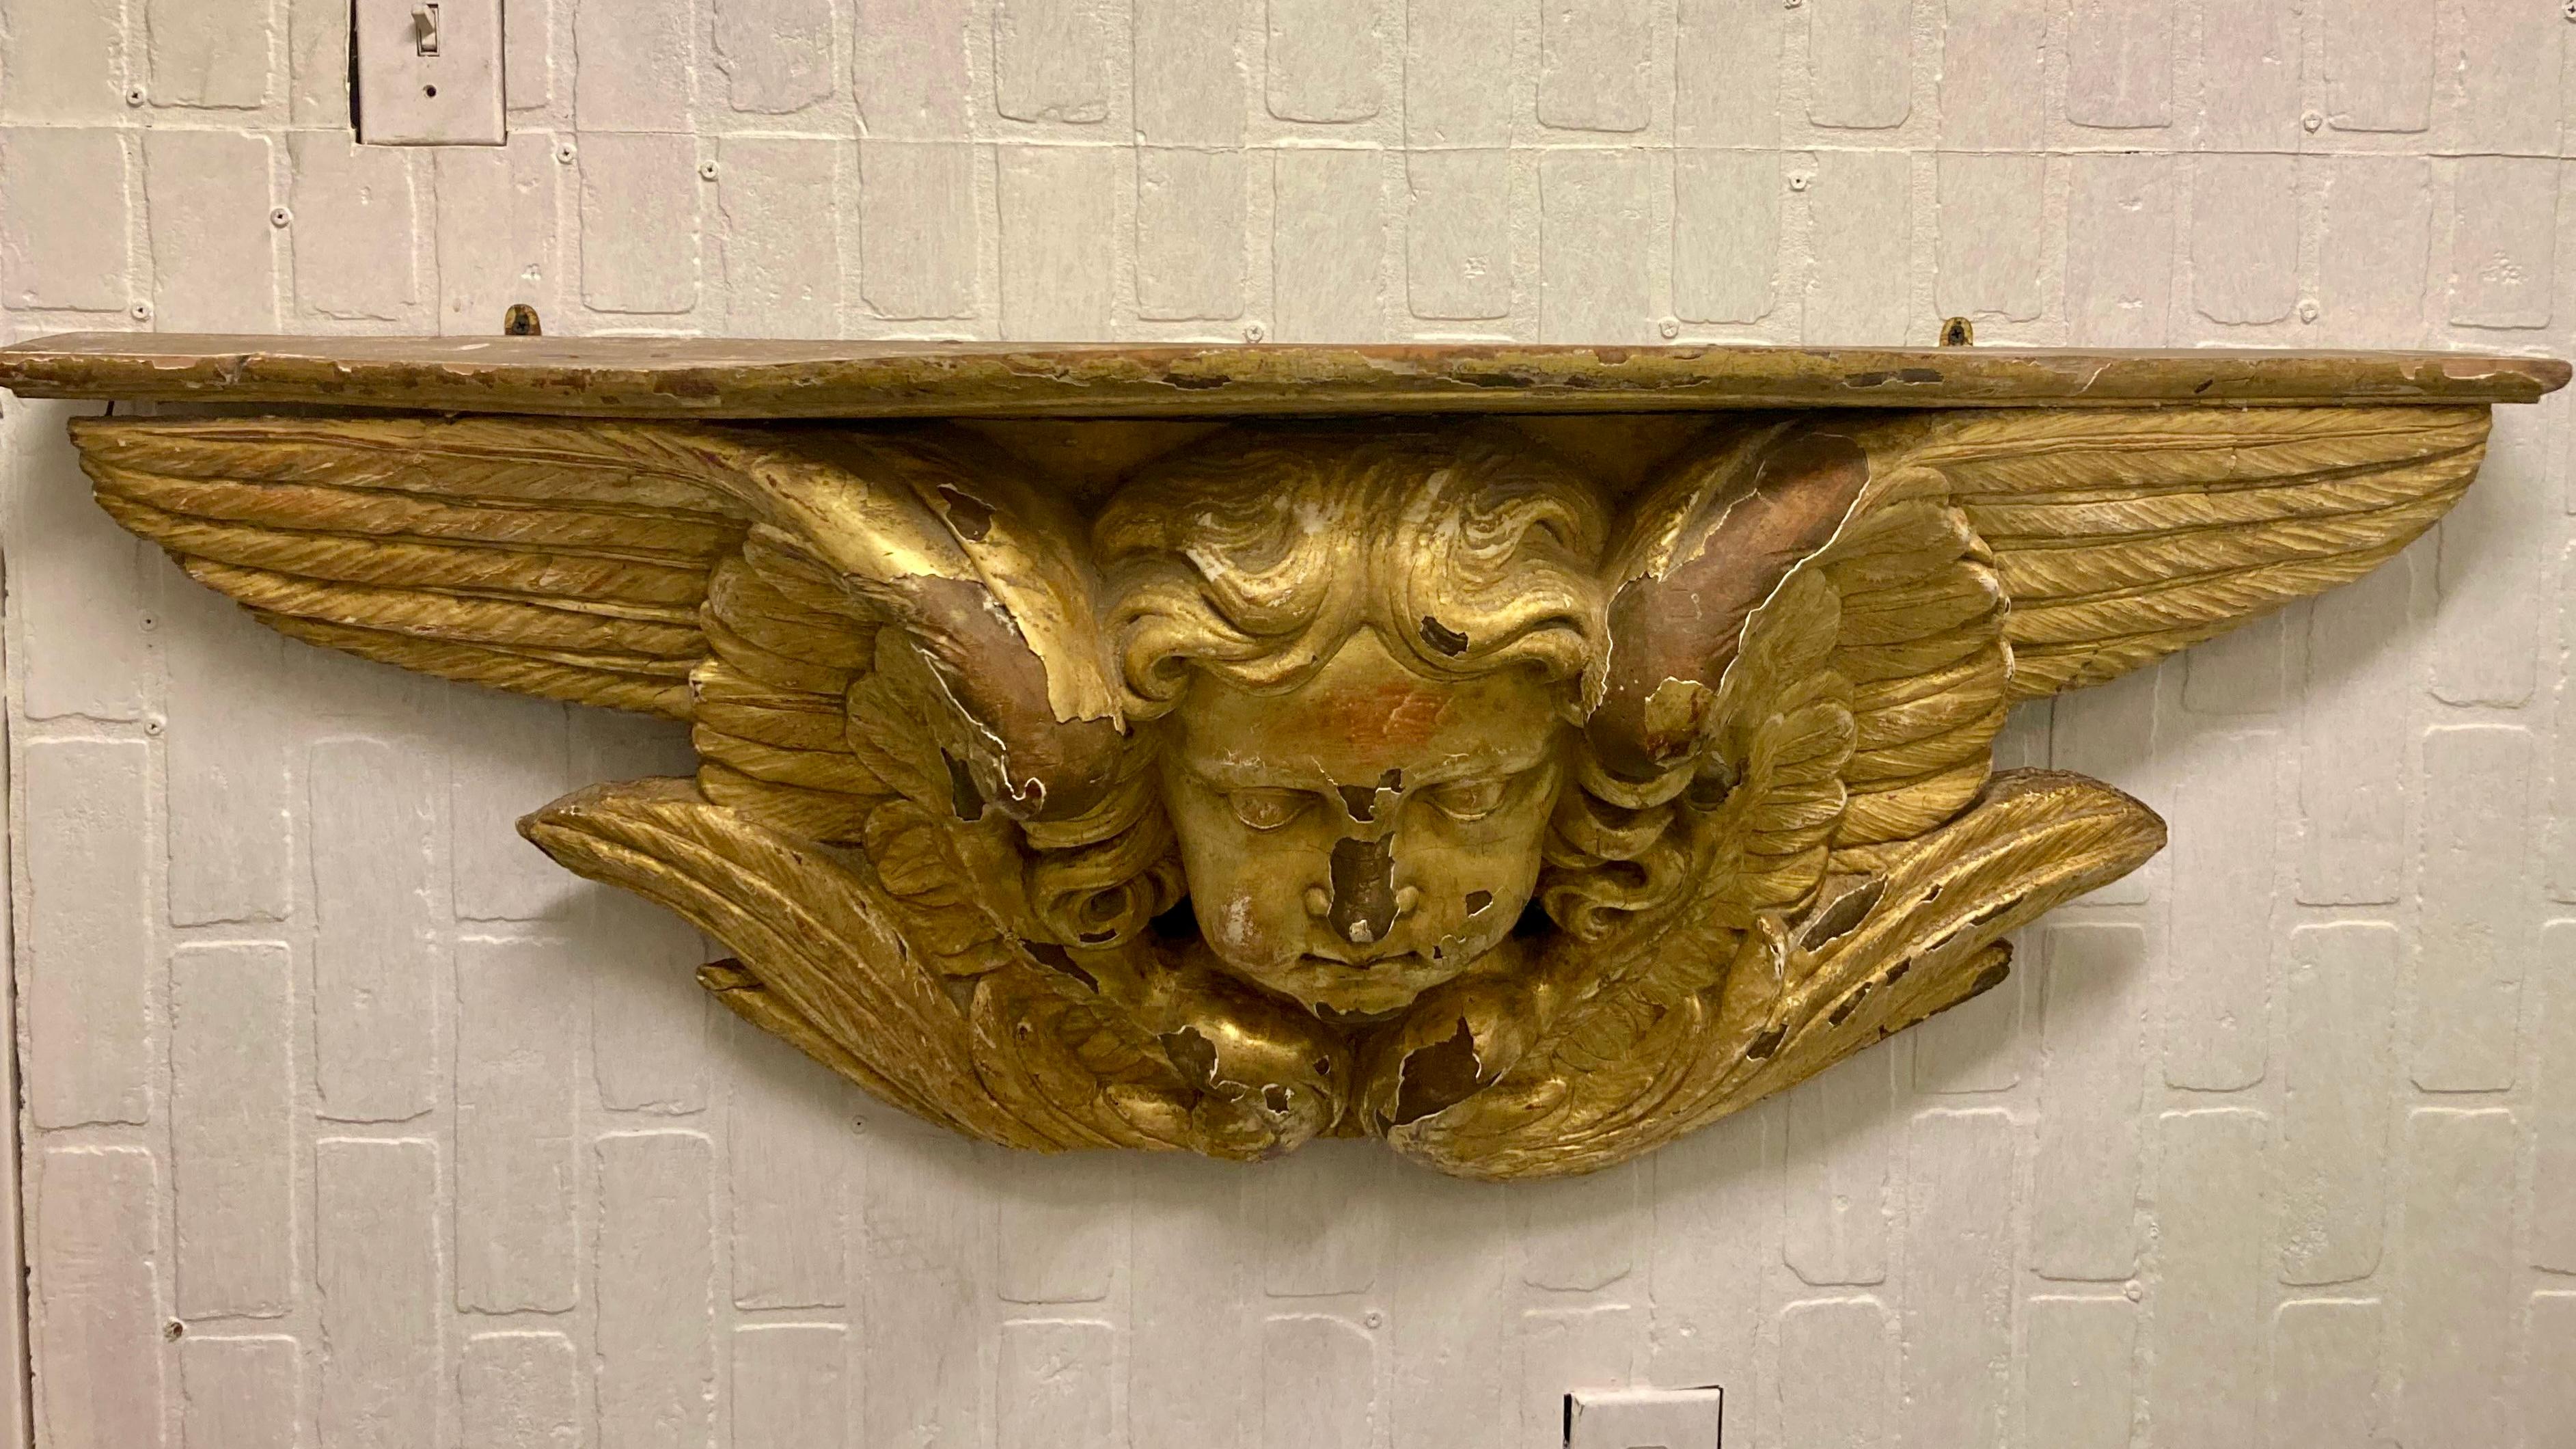 Gorgeous 17th Century gilt carved wood angel wall mounted console. Incredible carving details on this ancient wall mounted gilt wood console. The face details, the wing details, and the surface details are very well organized and mounts easily to